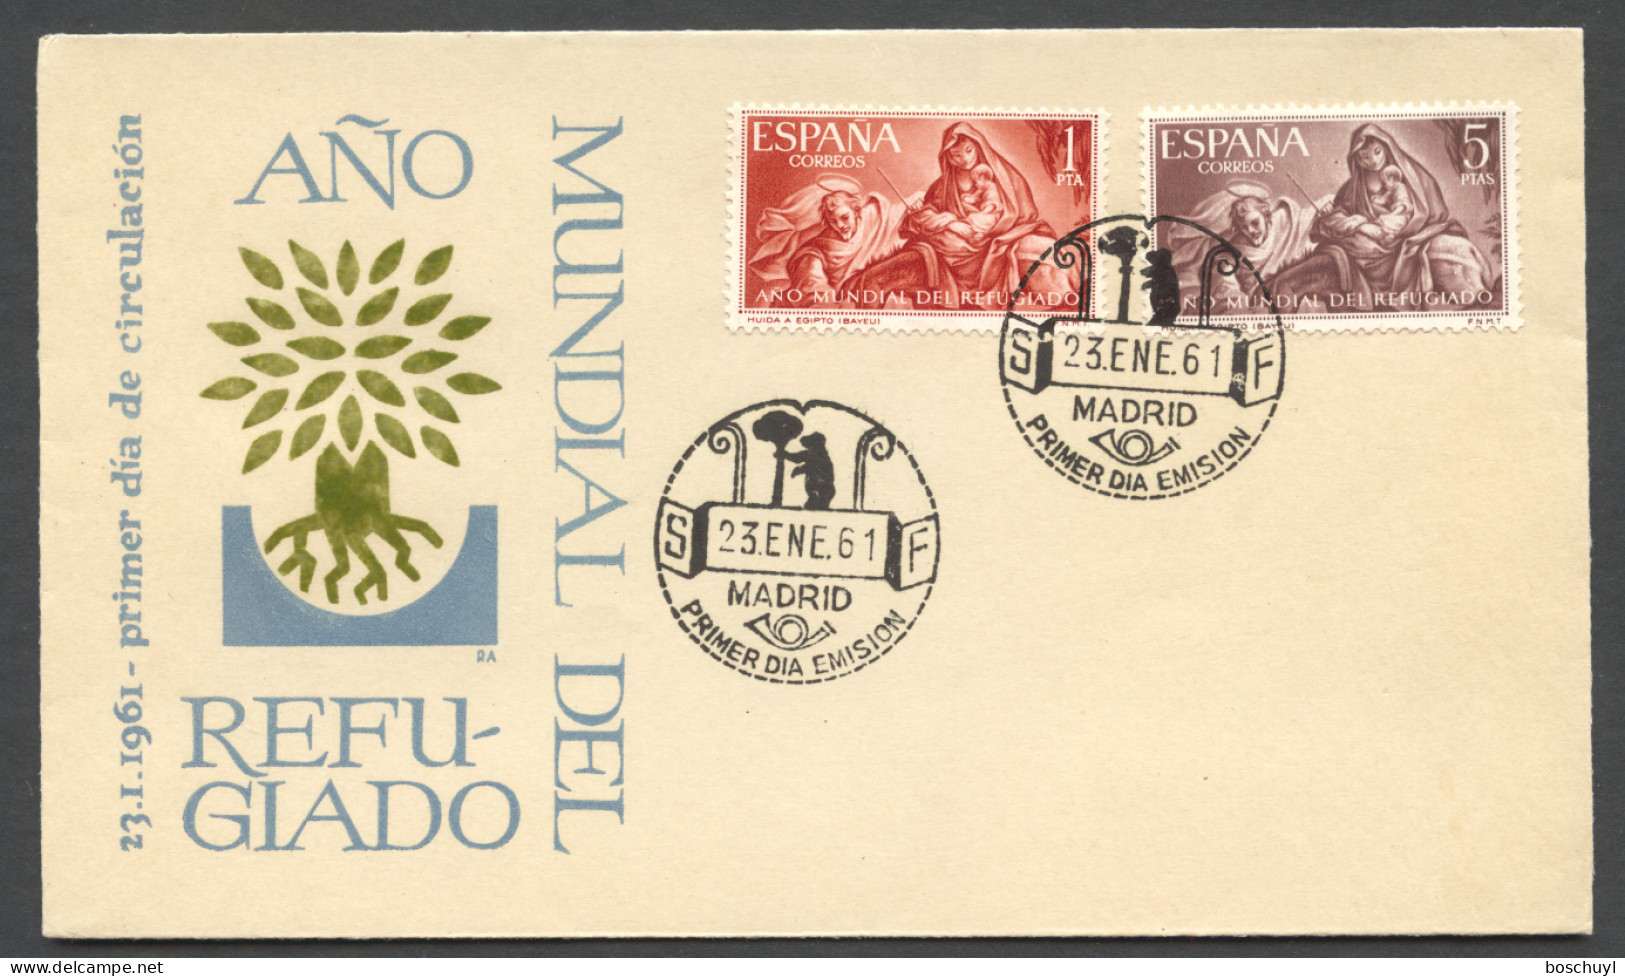 Spain, 1961, World Refugee Year, WRY, United Nations, FDC, Michel 1221-1222 - FDC